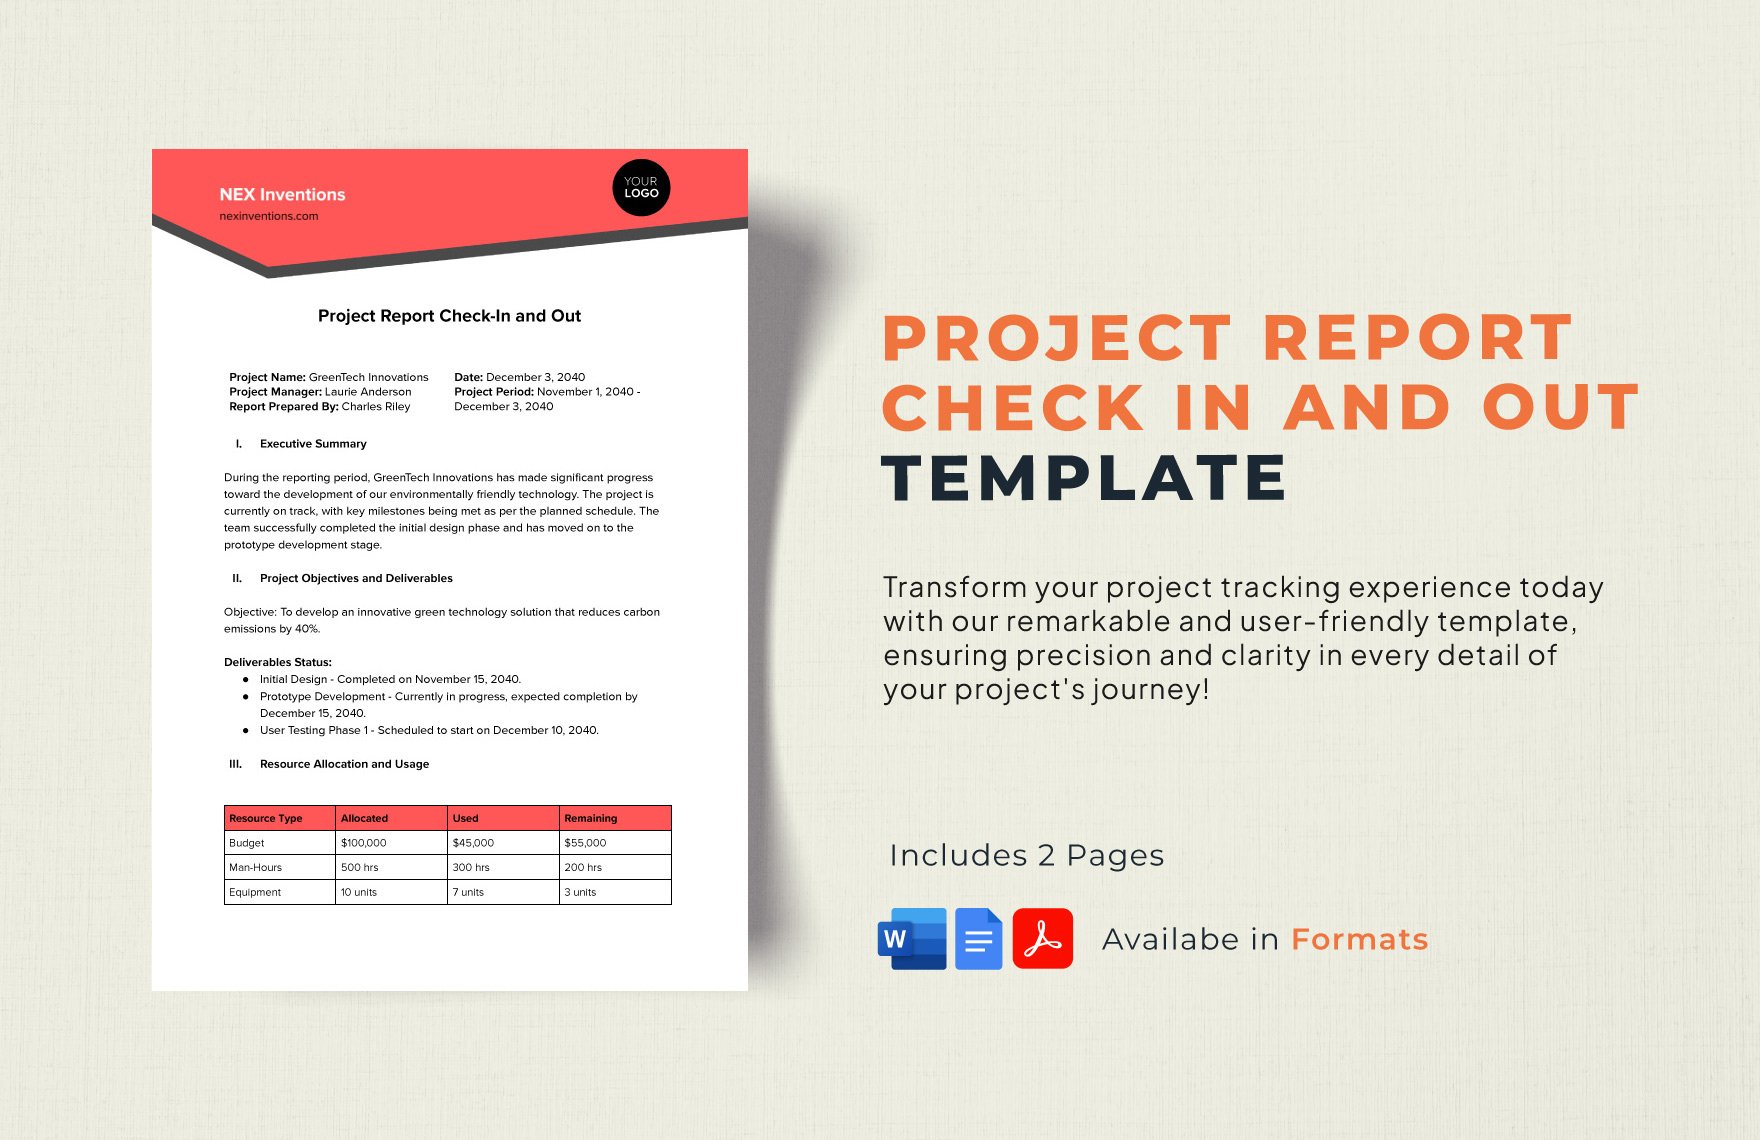 Project Report Check-in and Out Template